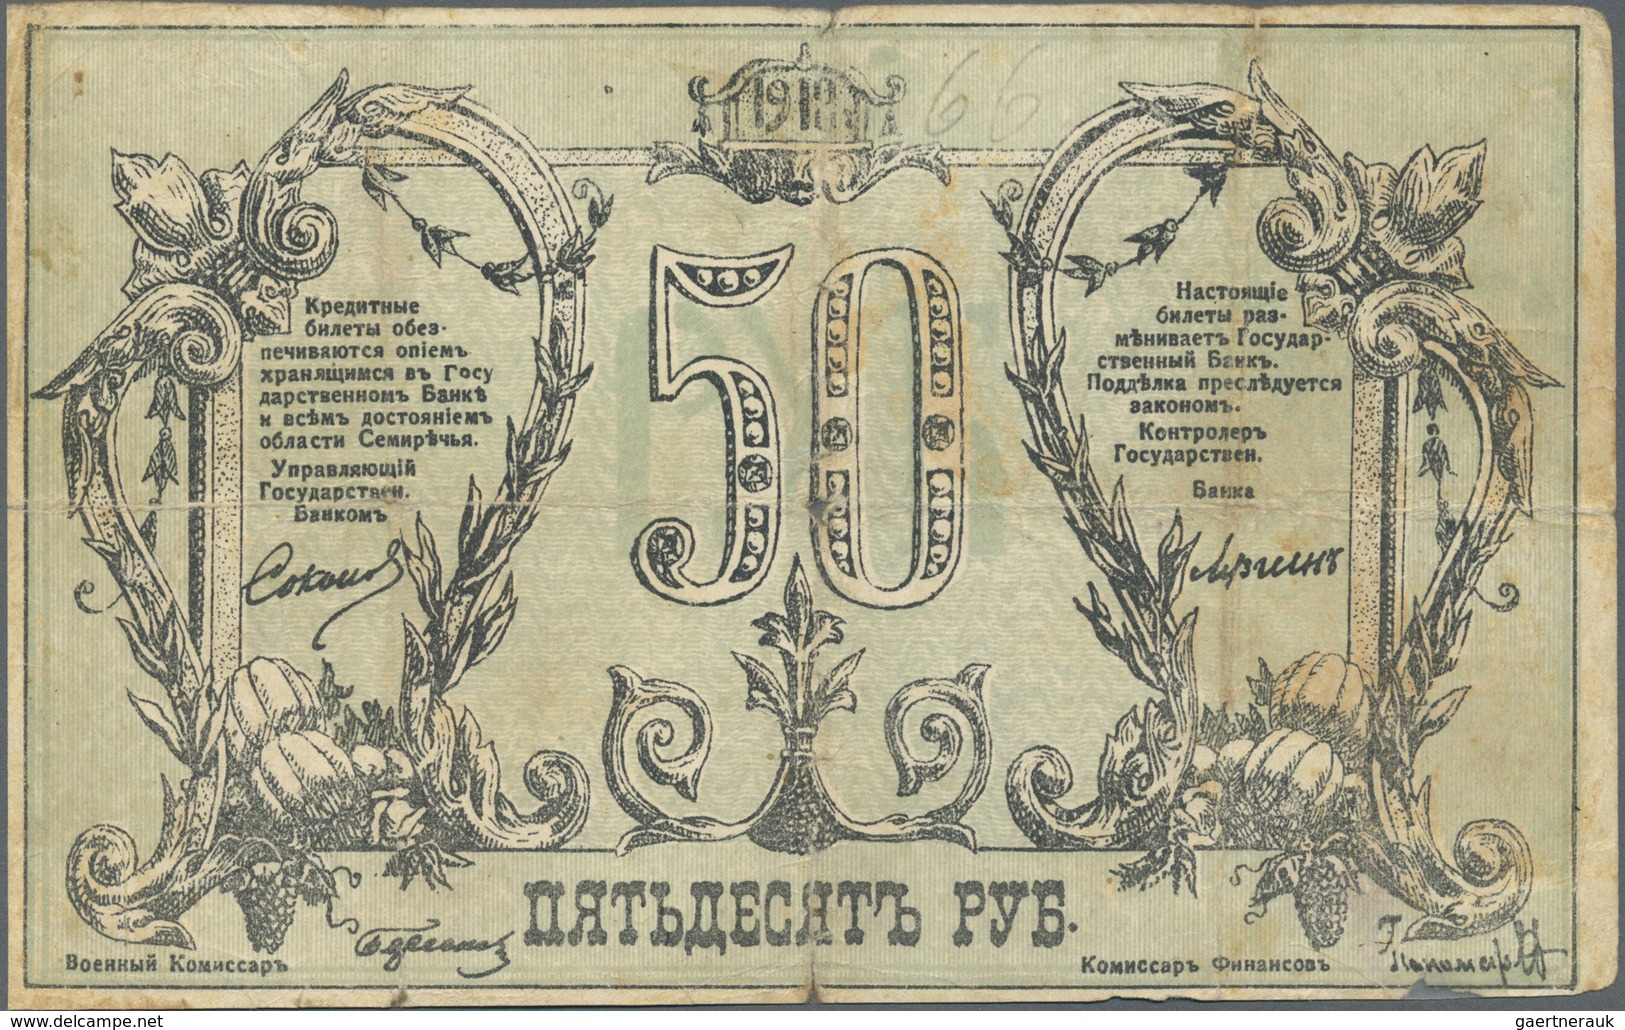 Kazakhstan / Kasachstan: 50 Rubles ND(1918) P. S1123 In Used Condition With Strong Folds, Light Stai - Kazakhstan